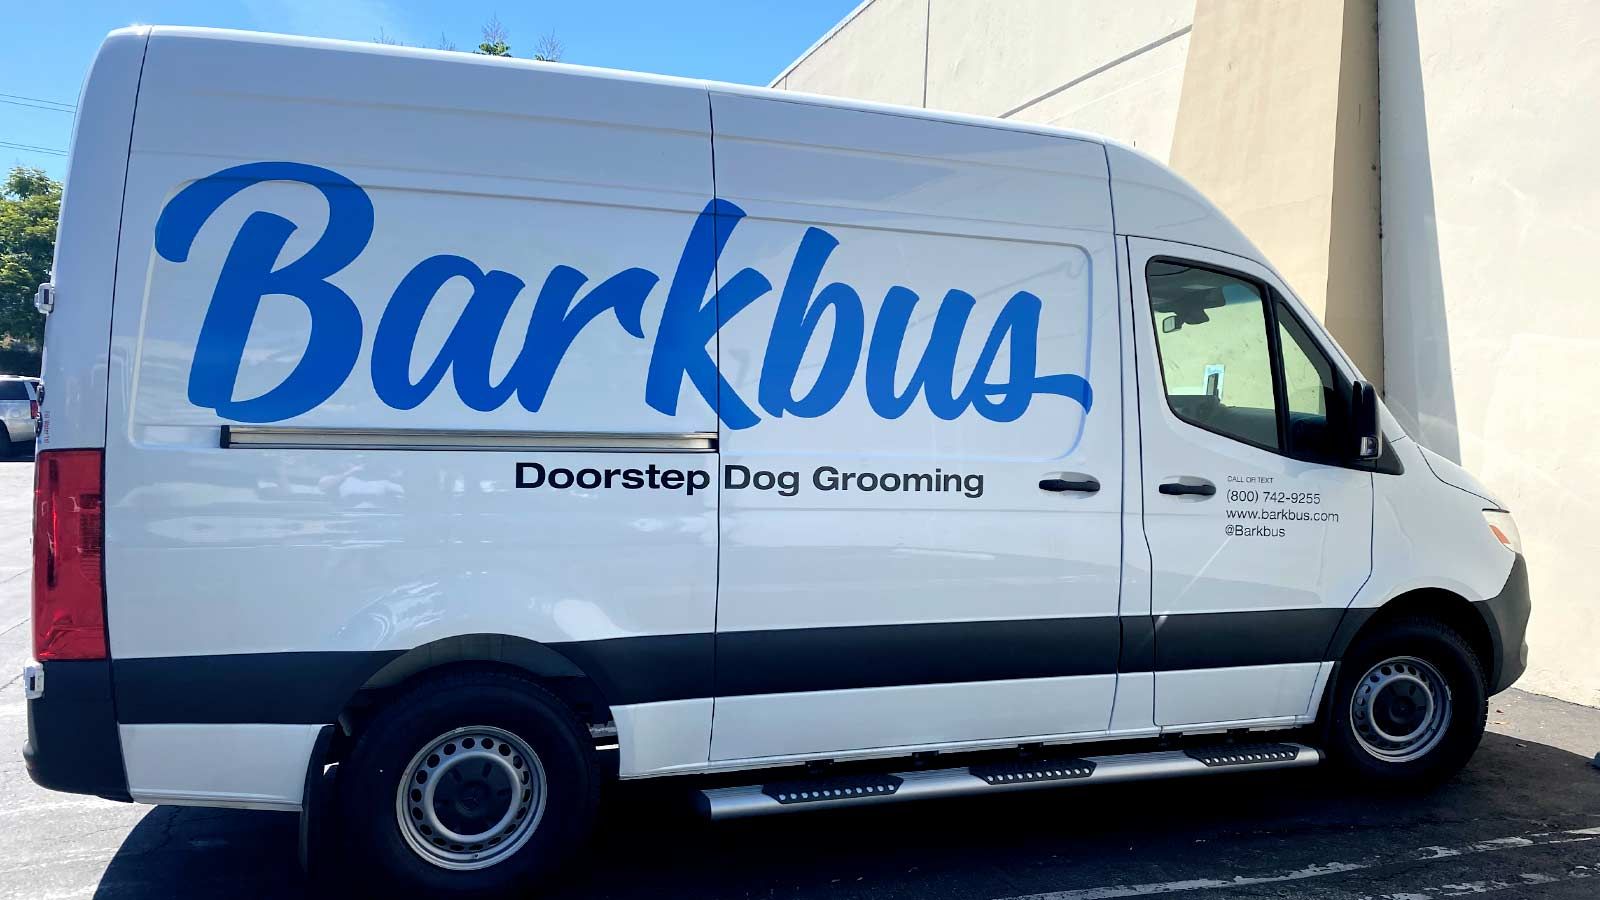 Barkbus car graphics attached to the side of the vehicle